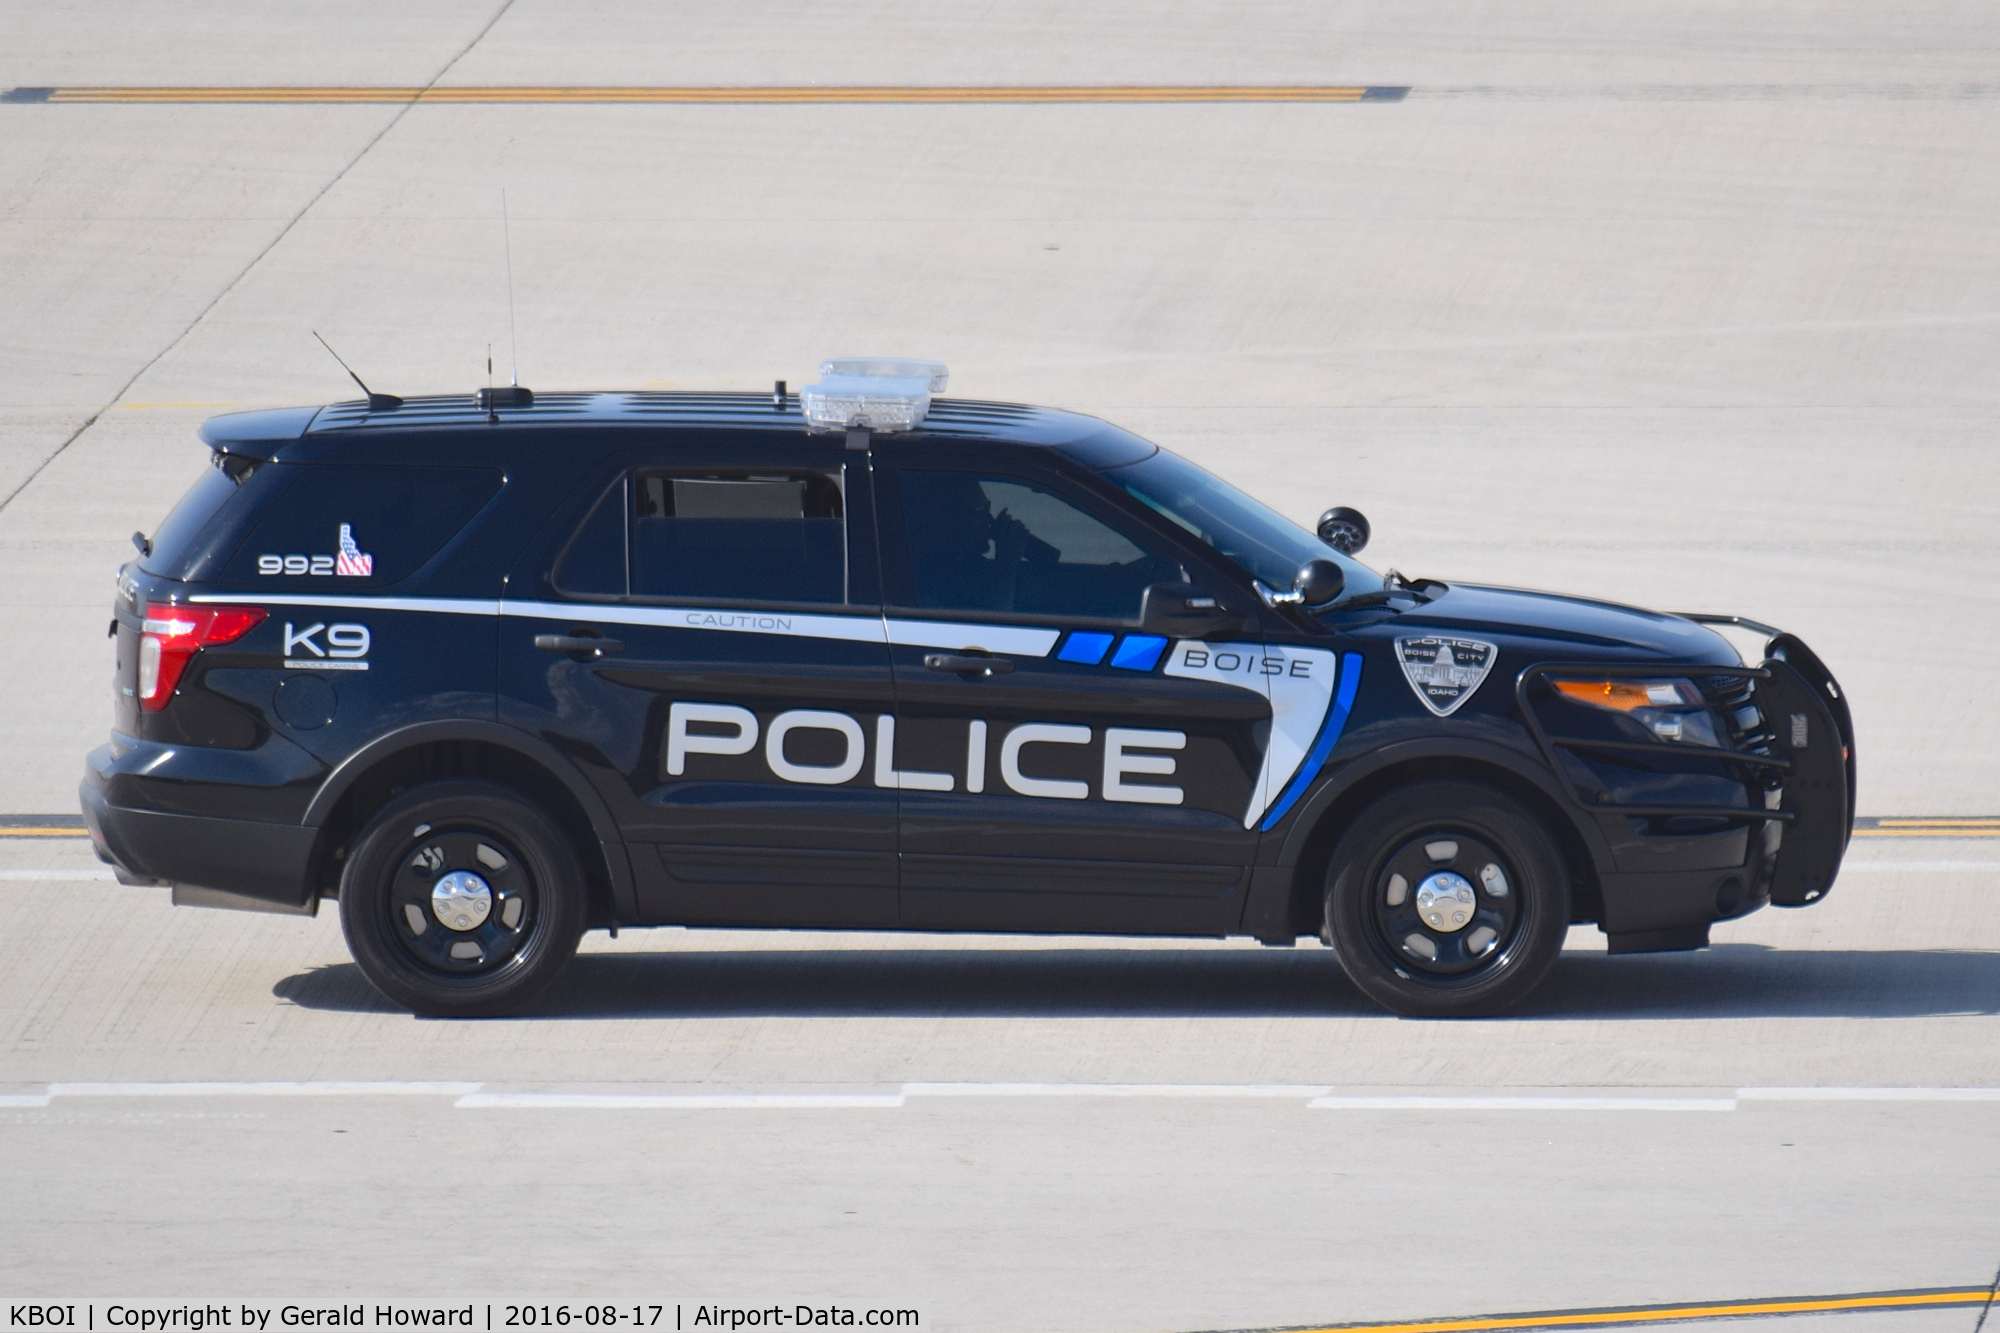 Boise Air Terminal/gowen Fld Airport (BOI) - Boise City Police provide security for airport.